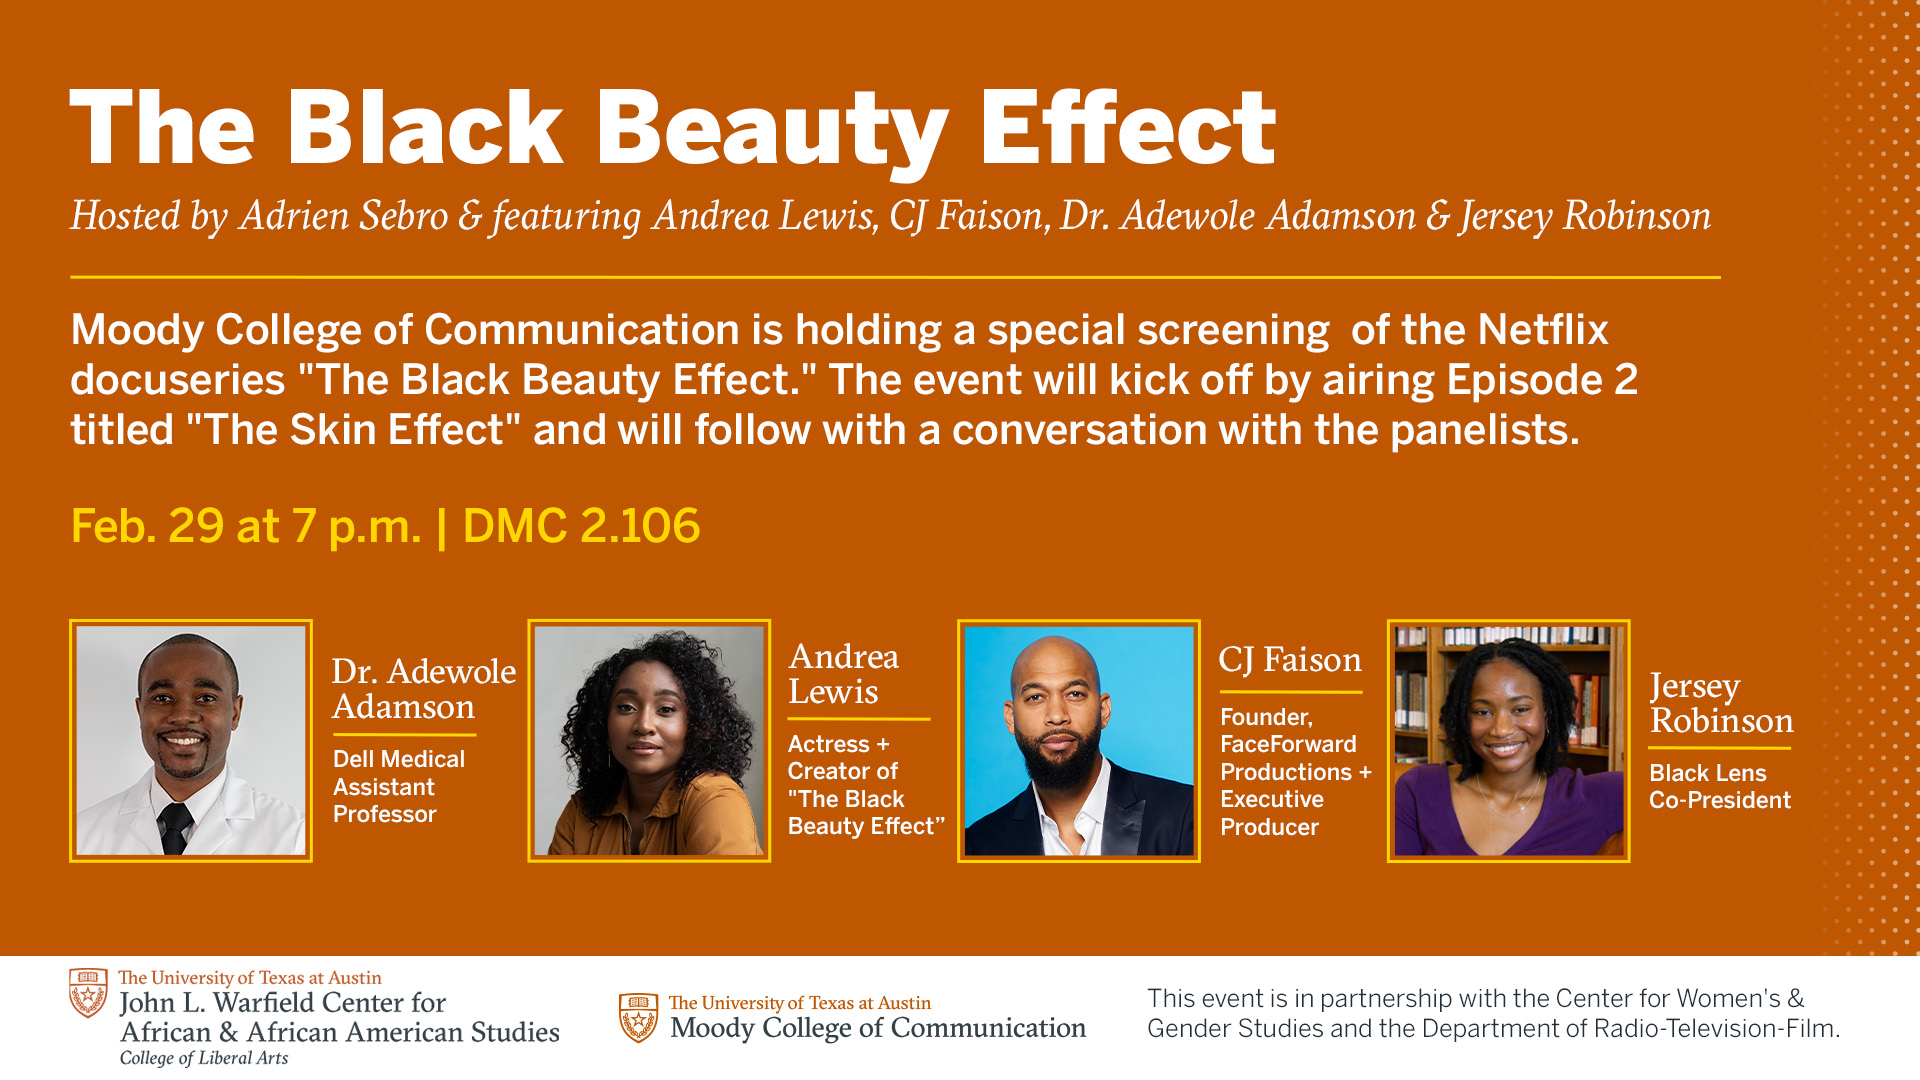 The Black Beauty Effect Feb 29 screening and panel discussion